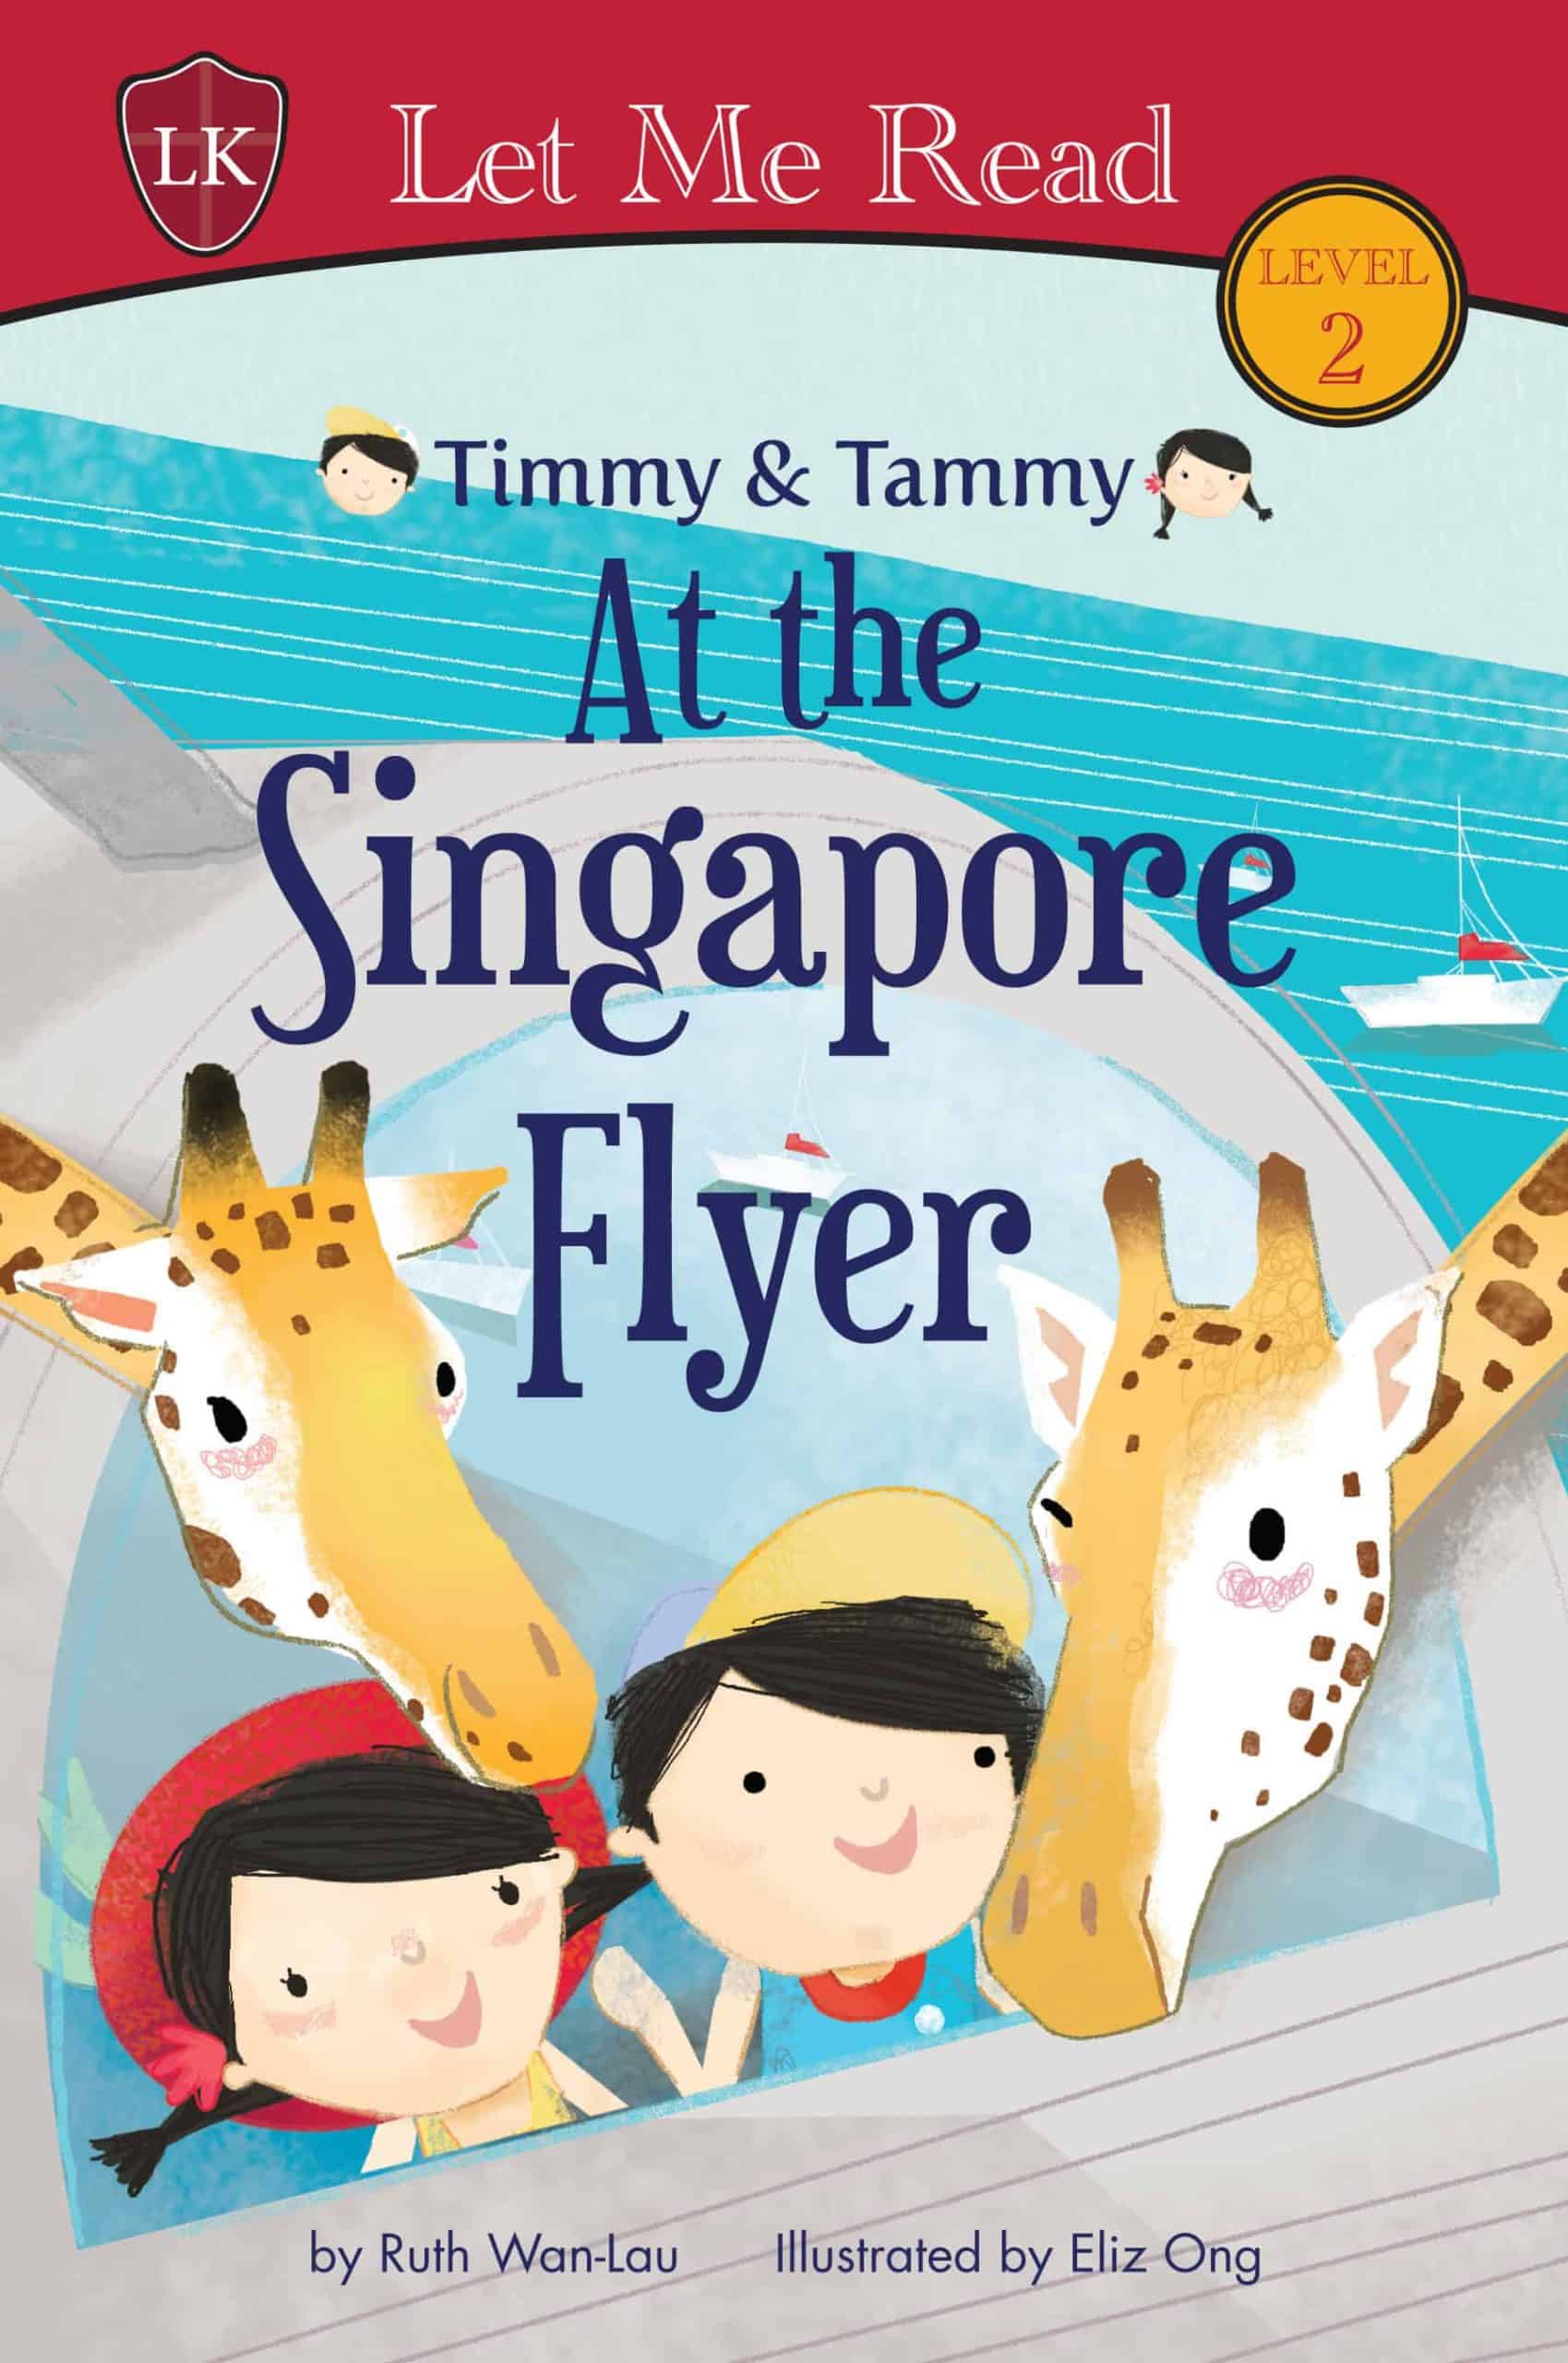 Timmy & Tammy (Level 2): At the Singapore Flyer